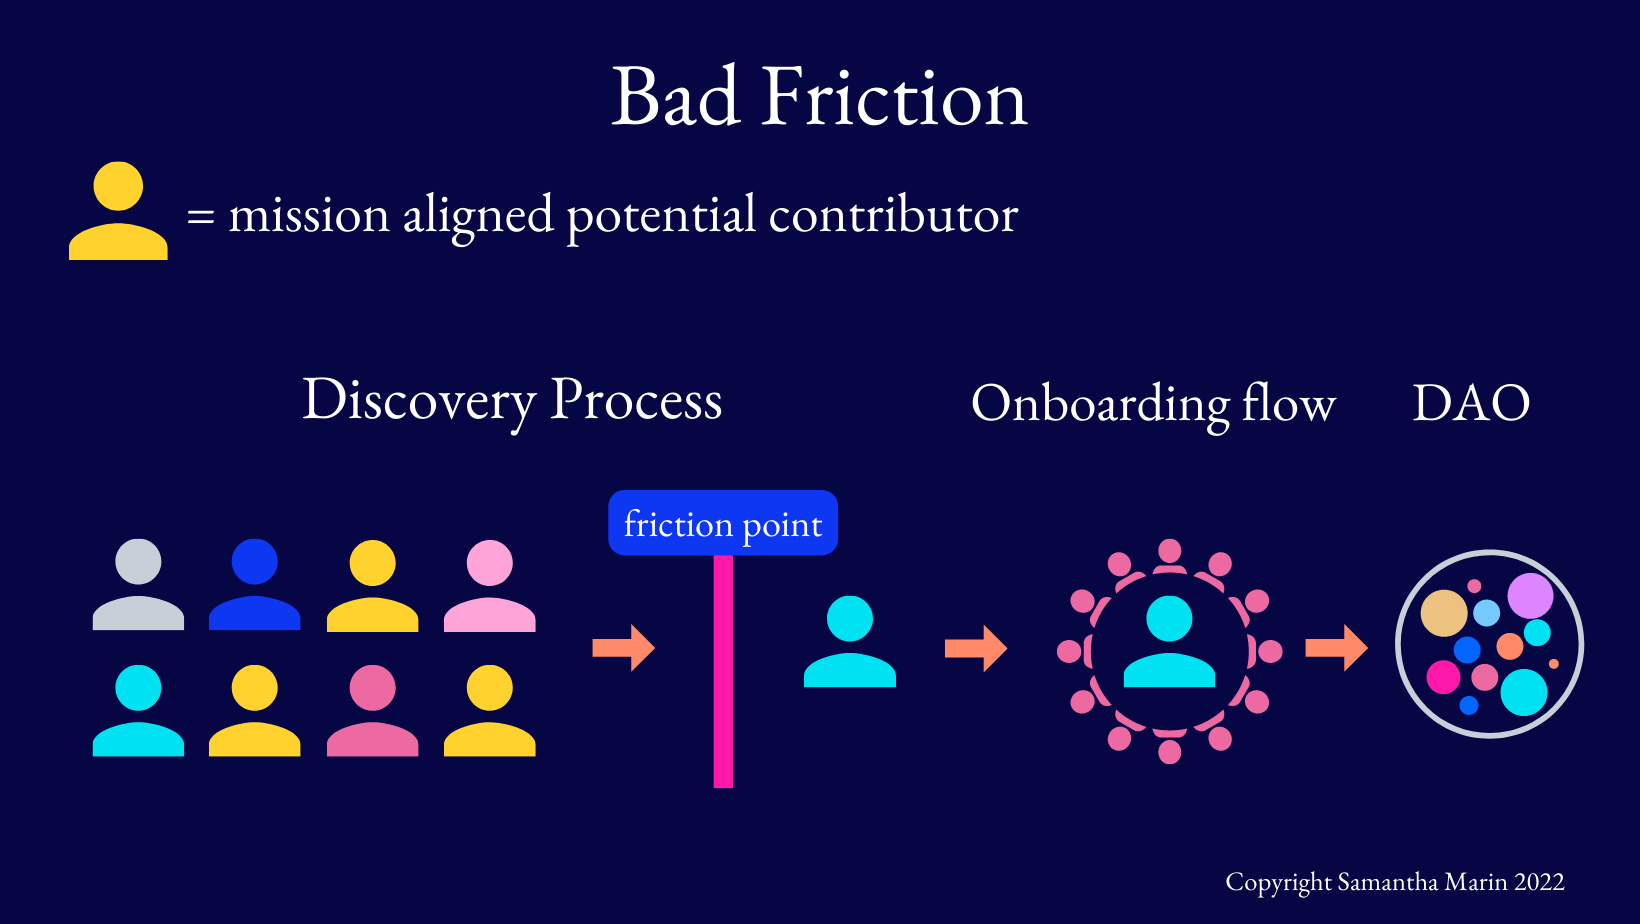 Bad friction prevents mission aligned potential contributors from entering the DAO's onboarding flow.